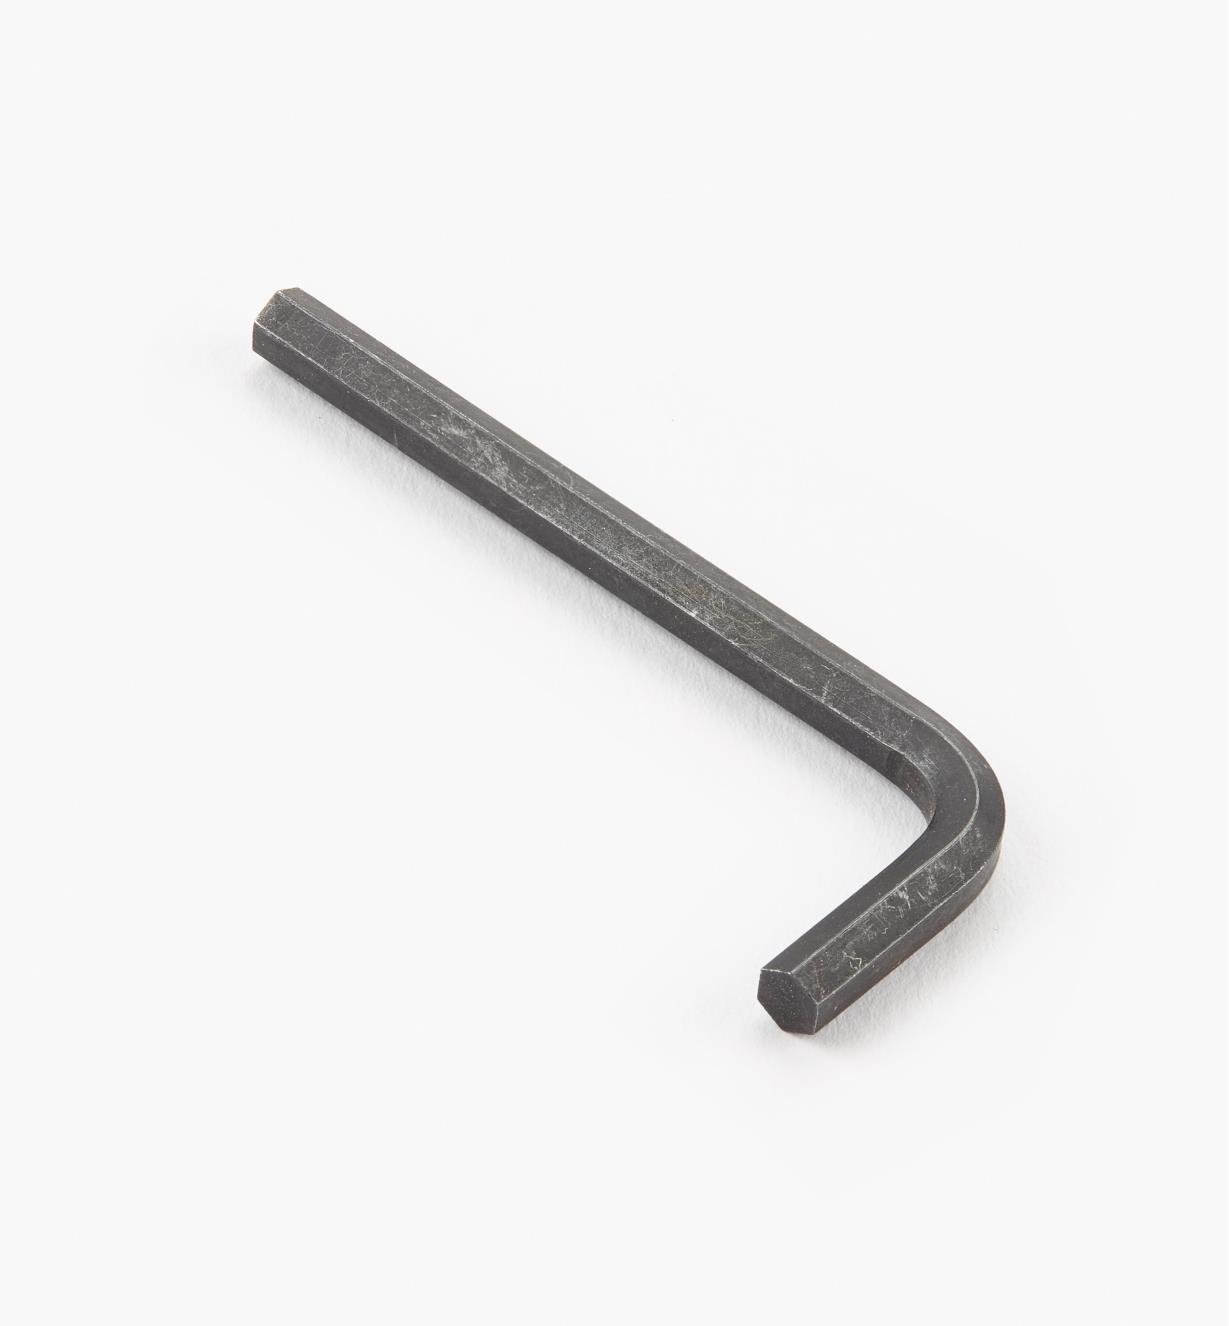 00M3021 - 4mm Hex Key for 1/4 20 Quick-Connect Hardware